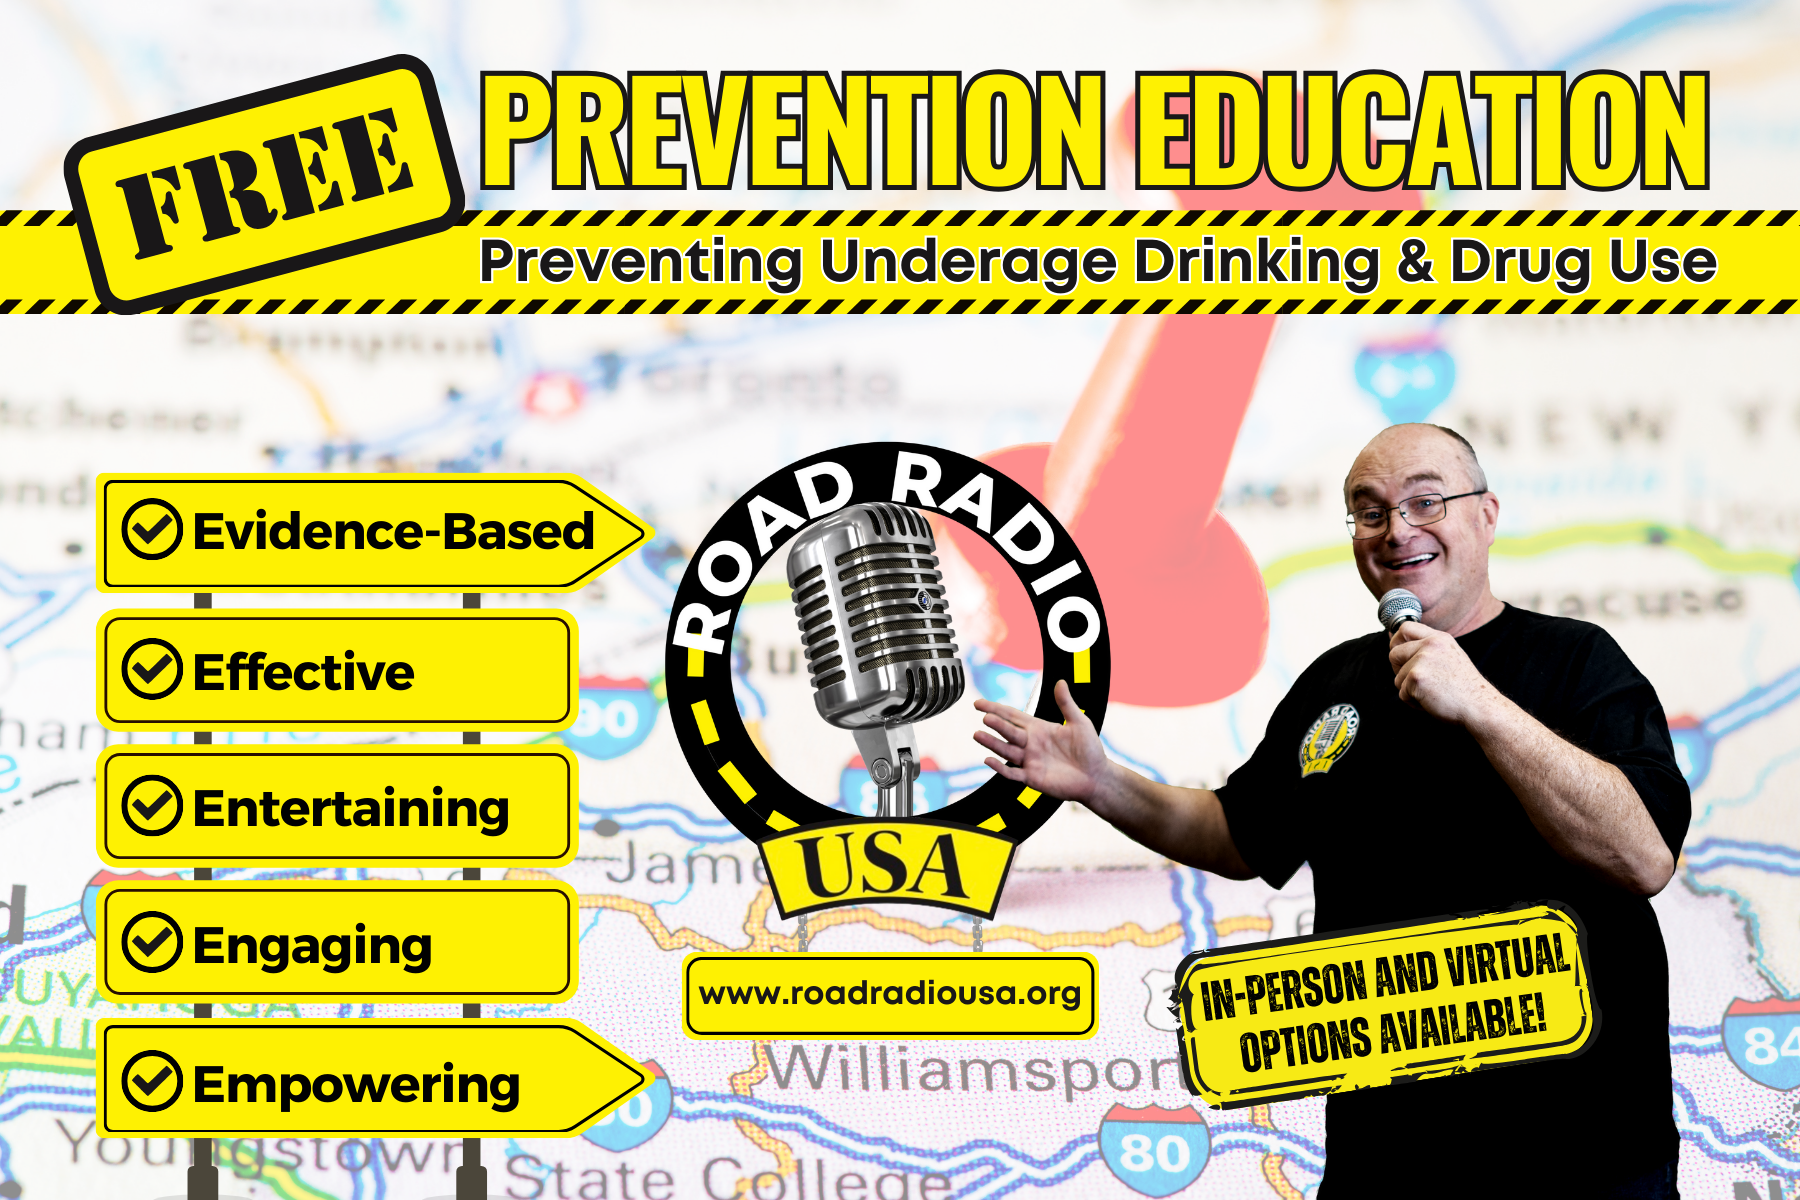 Road Radio USA is Prevention Education that WORKS!